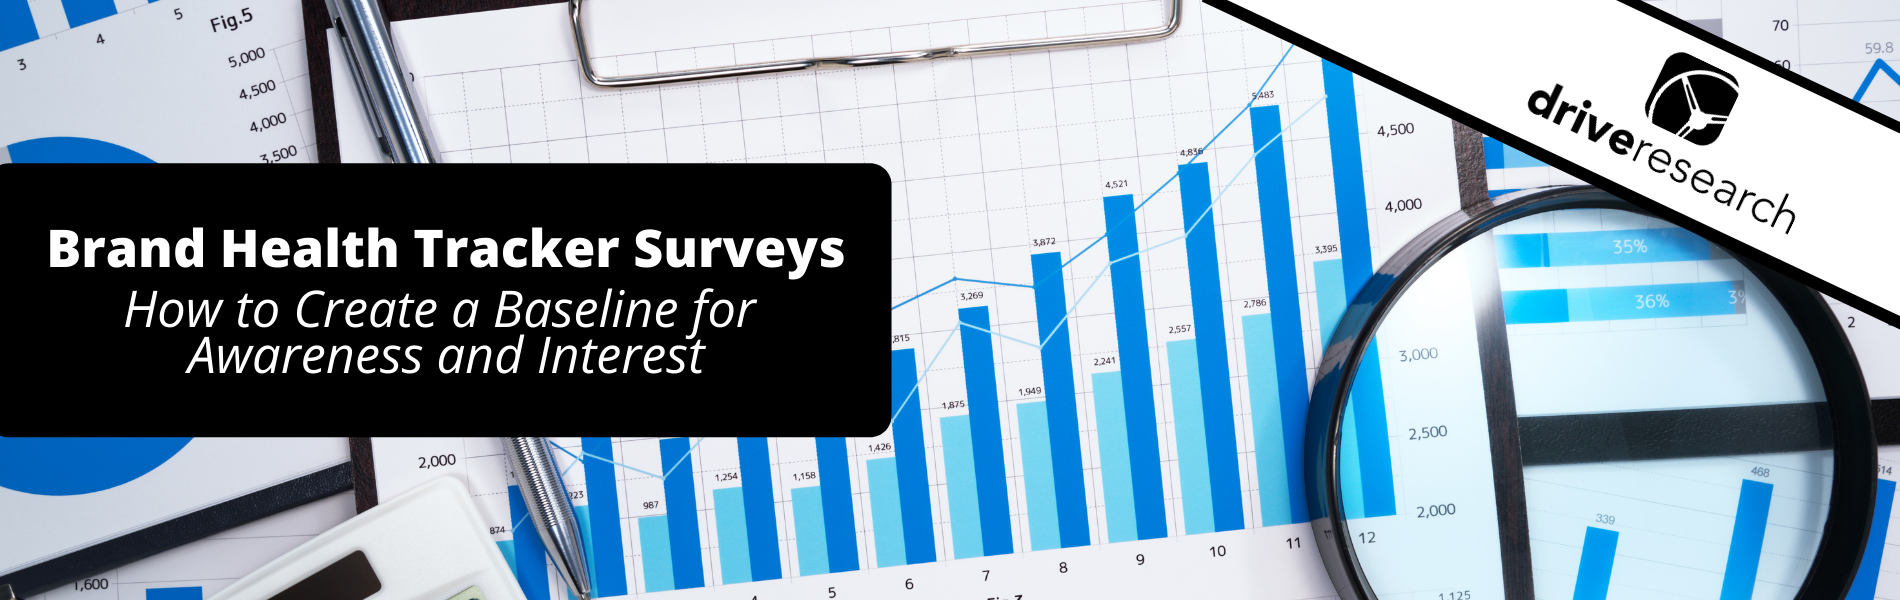 Brand Health Tracker Surveys: How to Create a Baseline for Awareness and Interest